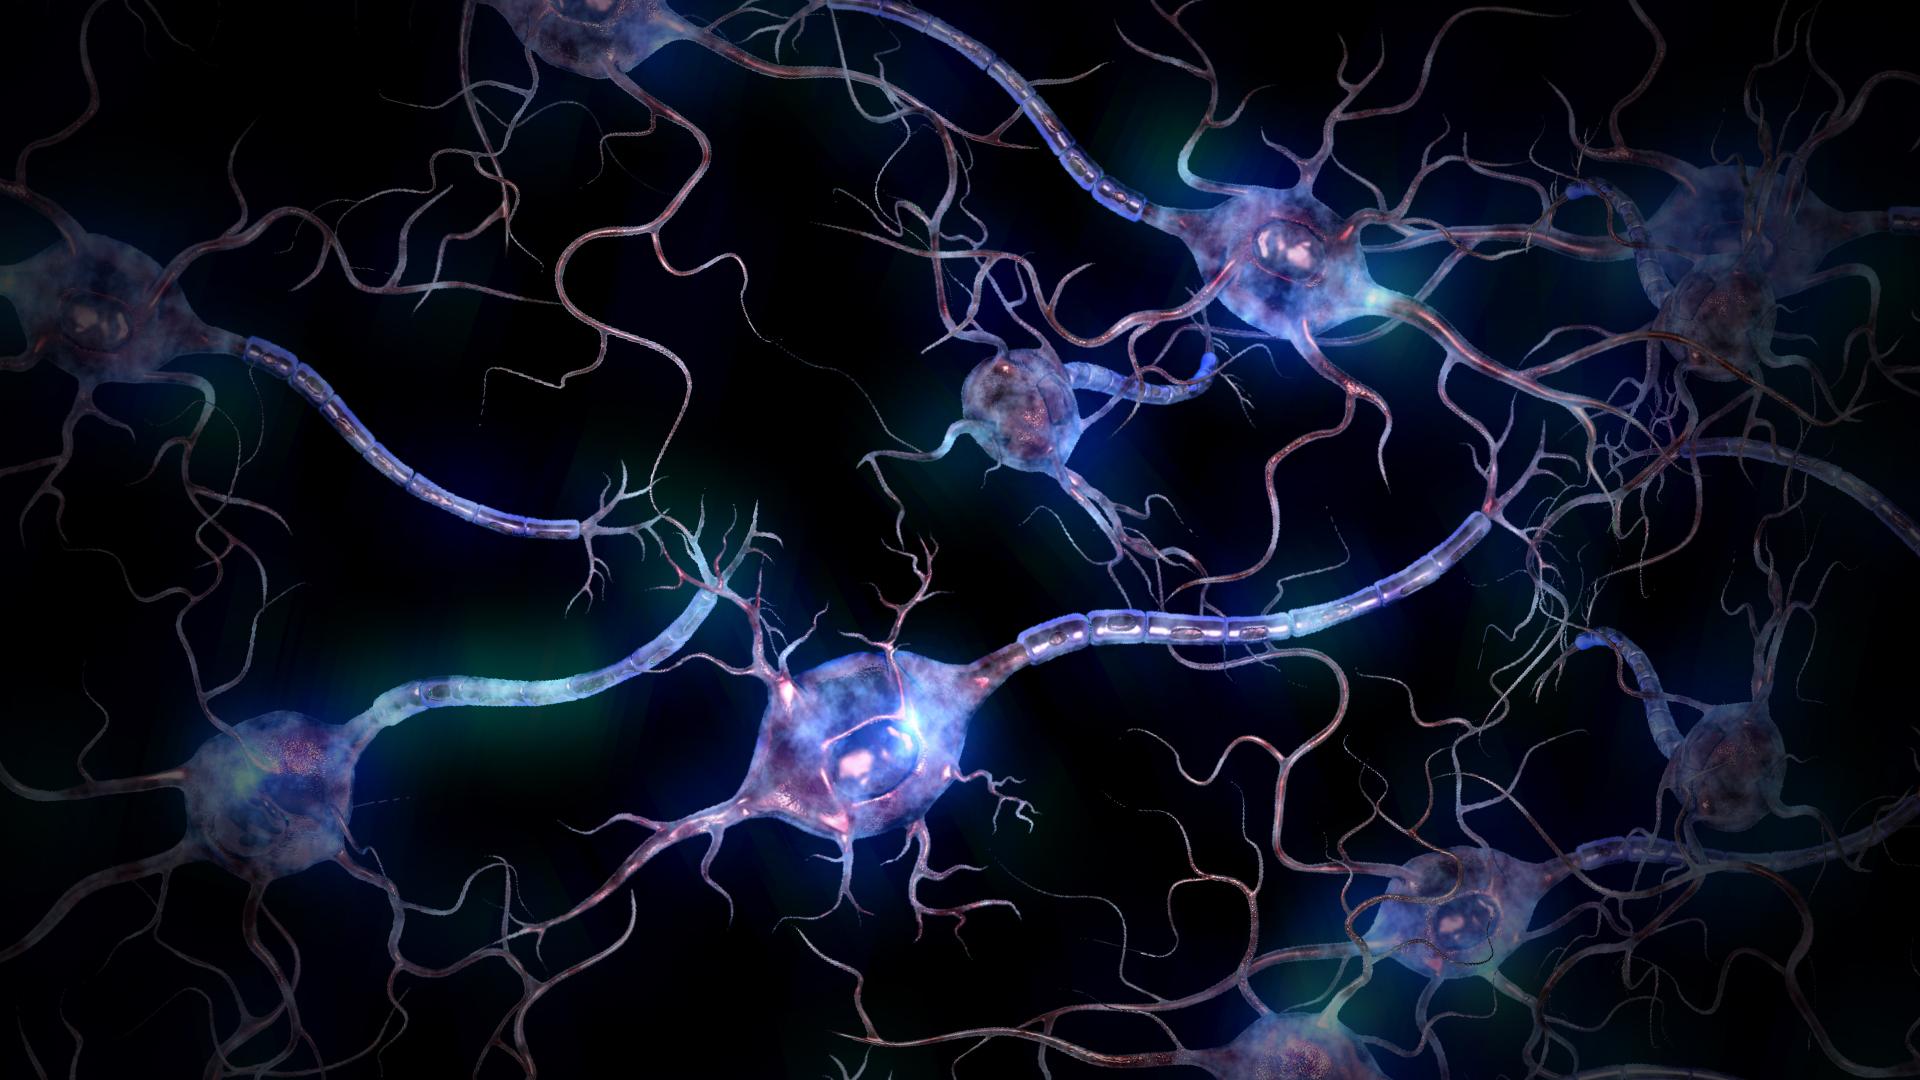 Download Neurons wallpapers for mobile phone free Neurons HD pictures